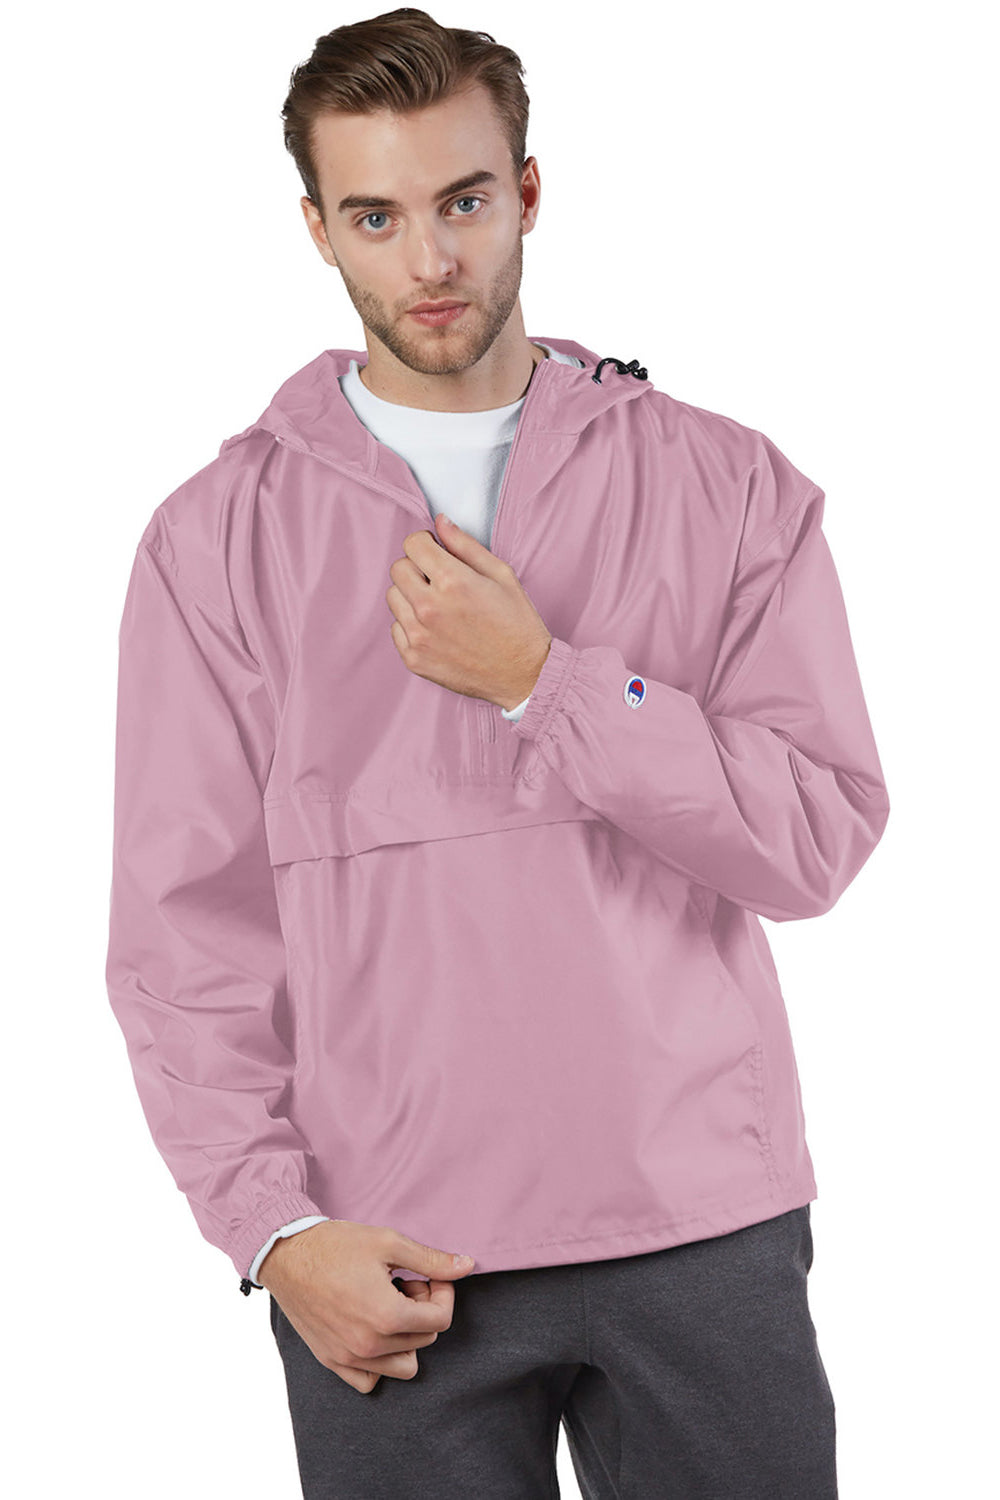 Champion CO200 Mens Packable Anorak 1/4 Zip Hooded Jacket Candy Pink Front